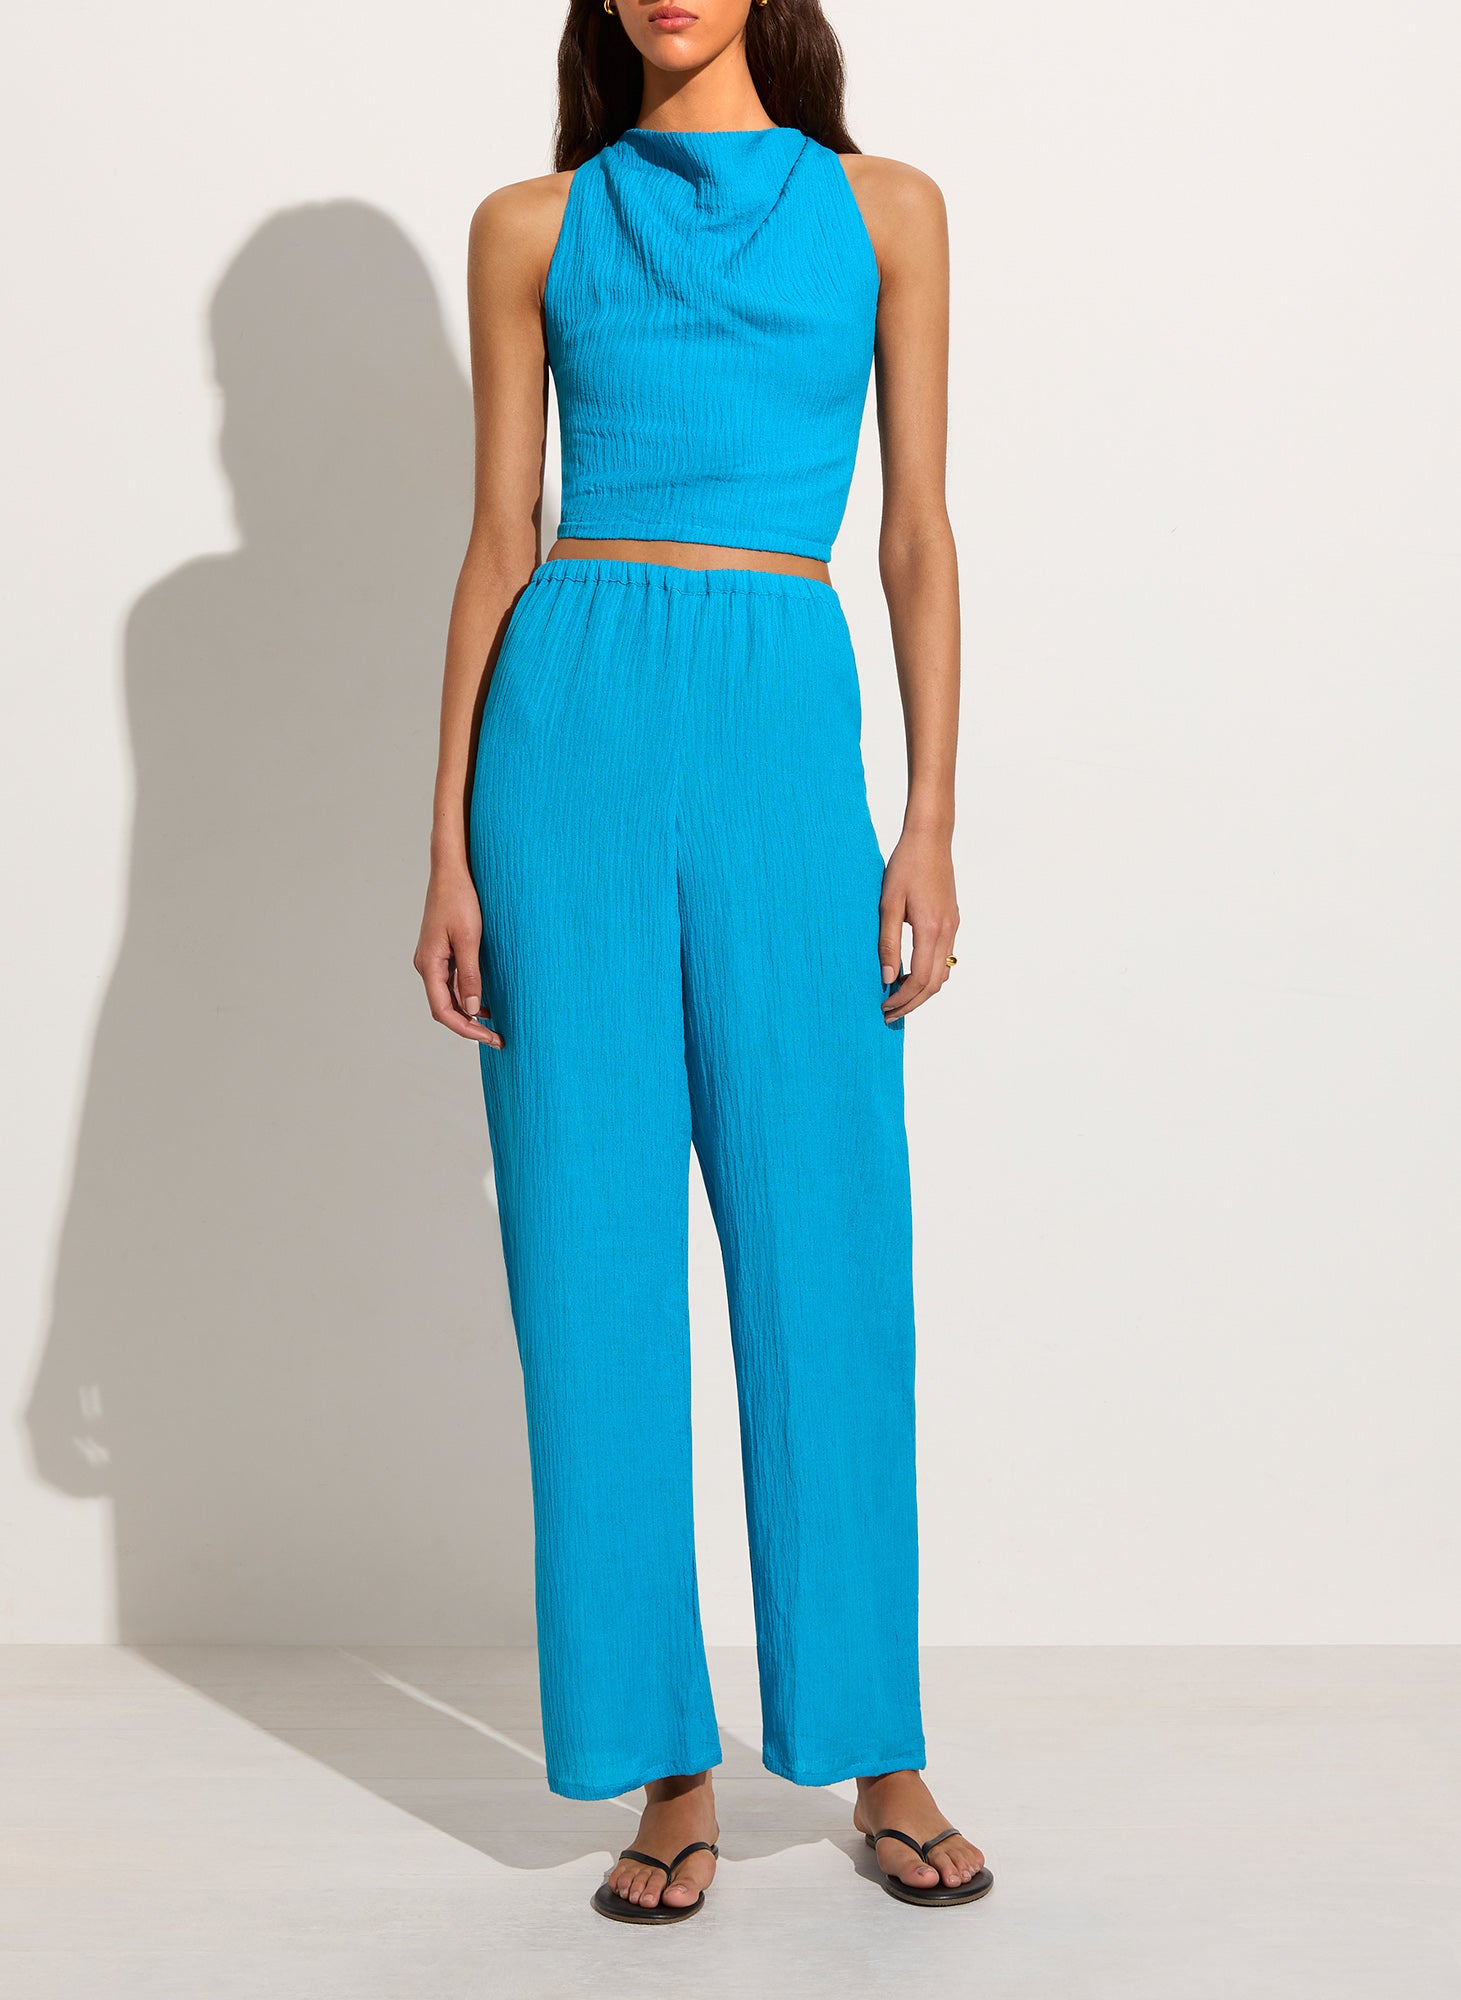 Melia Pant in Turquoise